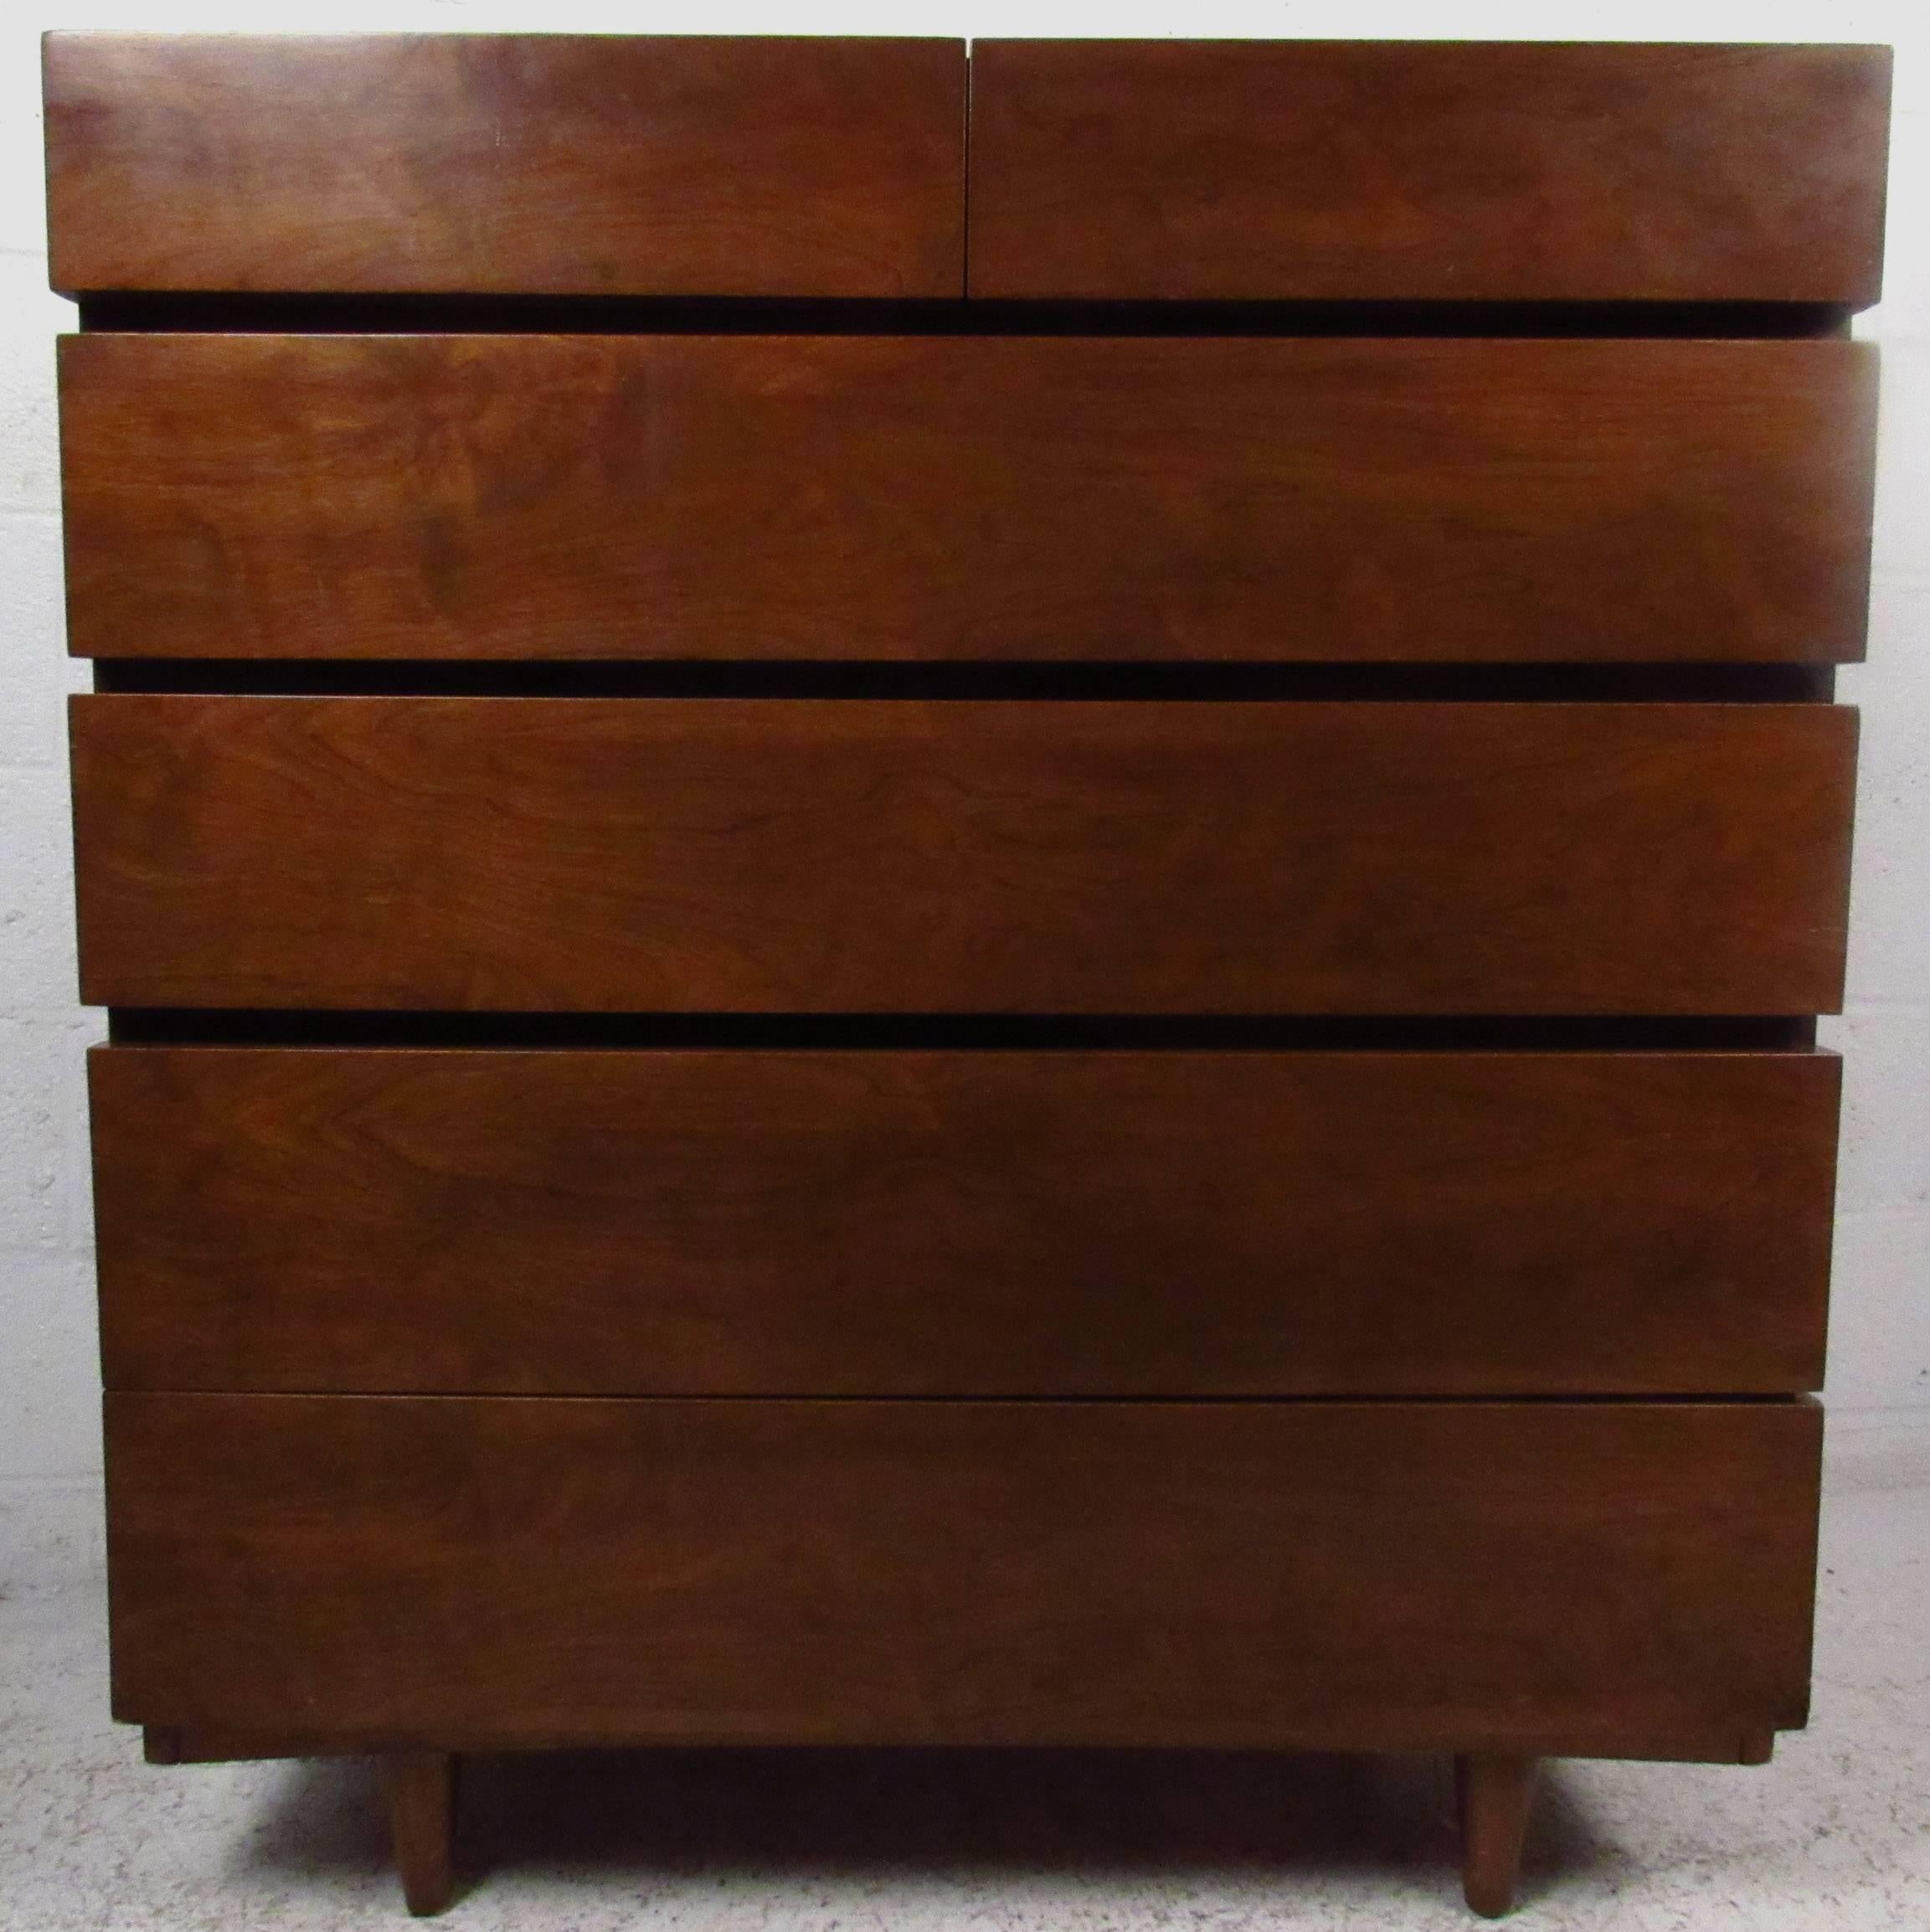 Vintage-modern highboy dresser by American of Martinsvile featuring six drawers with beautiful walnut grain throughout.

Please confirm item location NY or NJ with dealer.